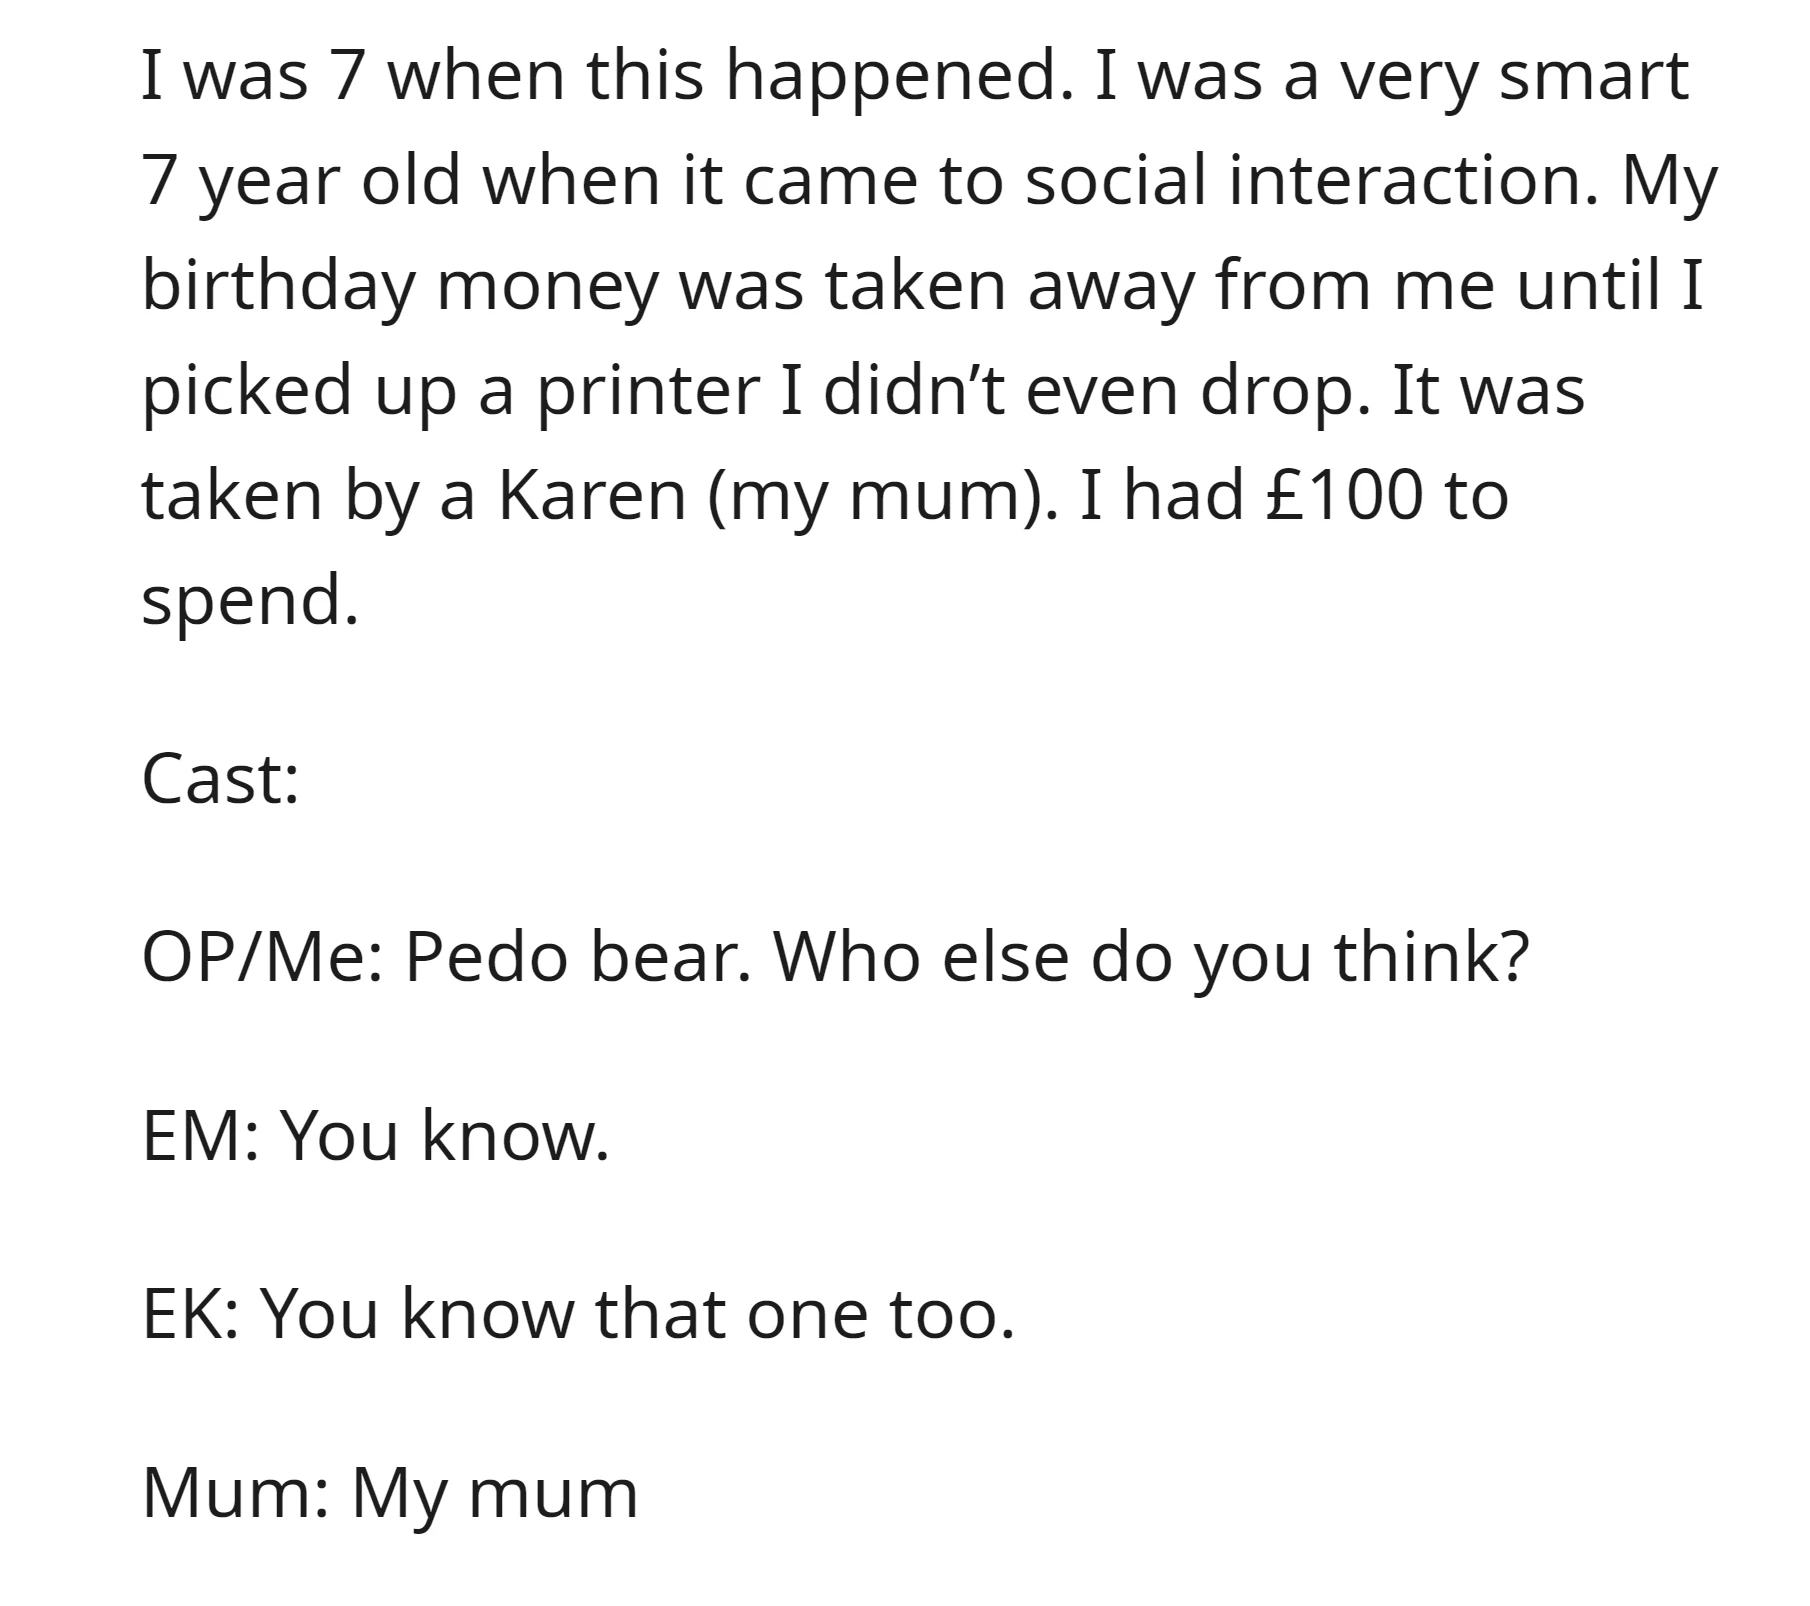 When OP was 7 years old, OP, they had £100 birthday money confiscated by their mum